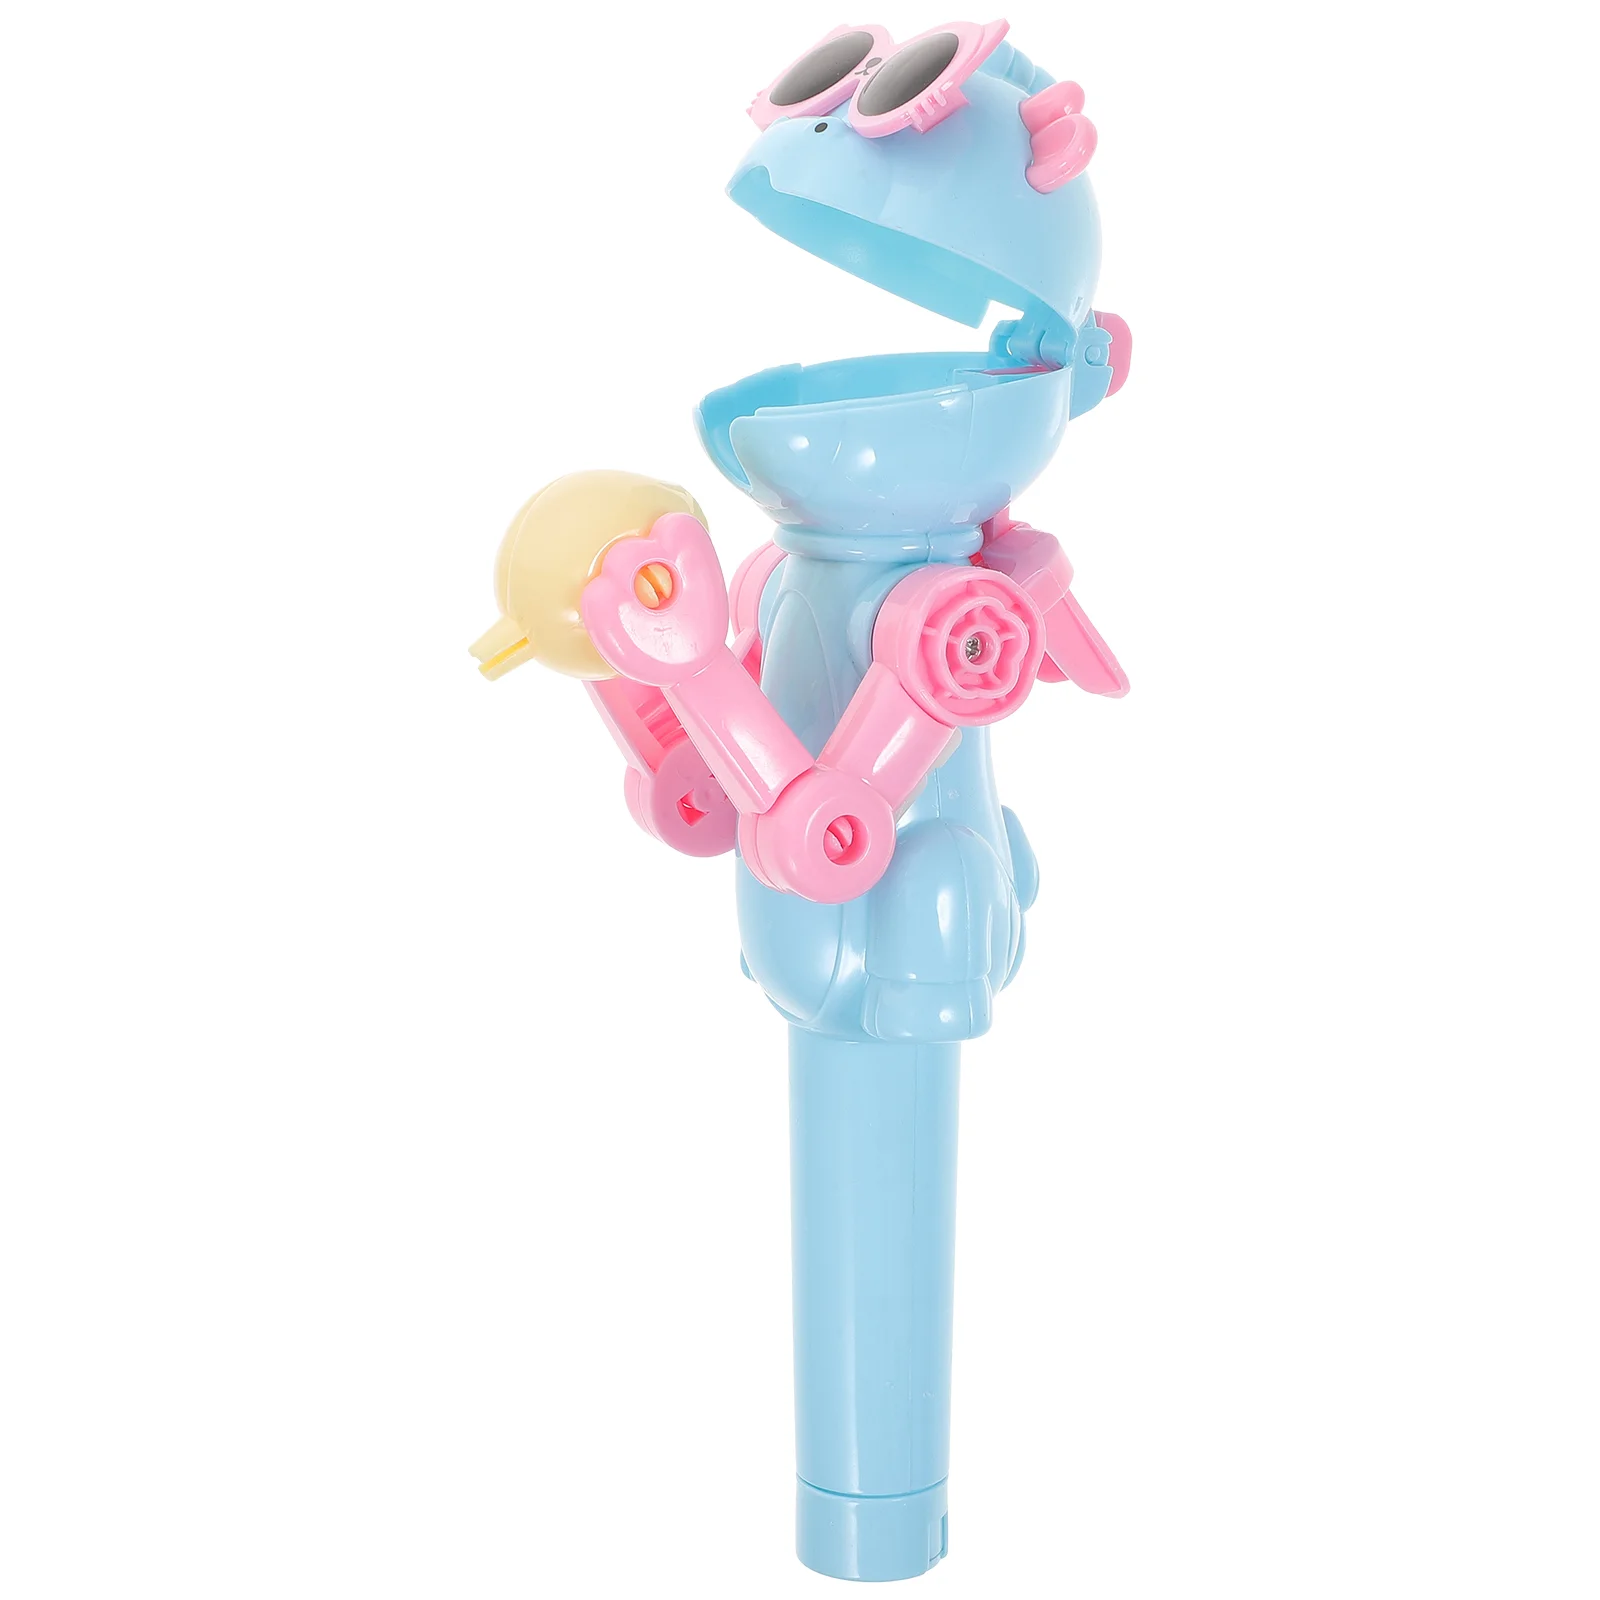 

Lollipop Machine Eat Toy Cartoon Robot Holder The Gift Portable Decompression Toys Personality Plastic Child Lollipops